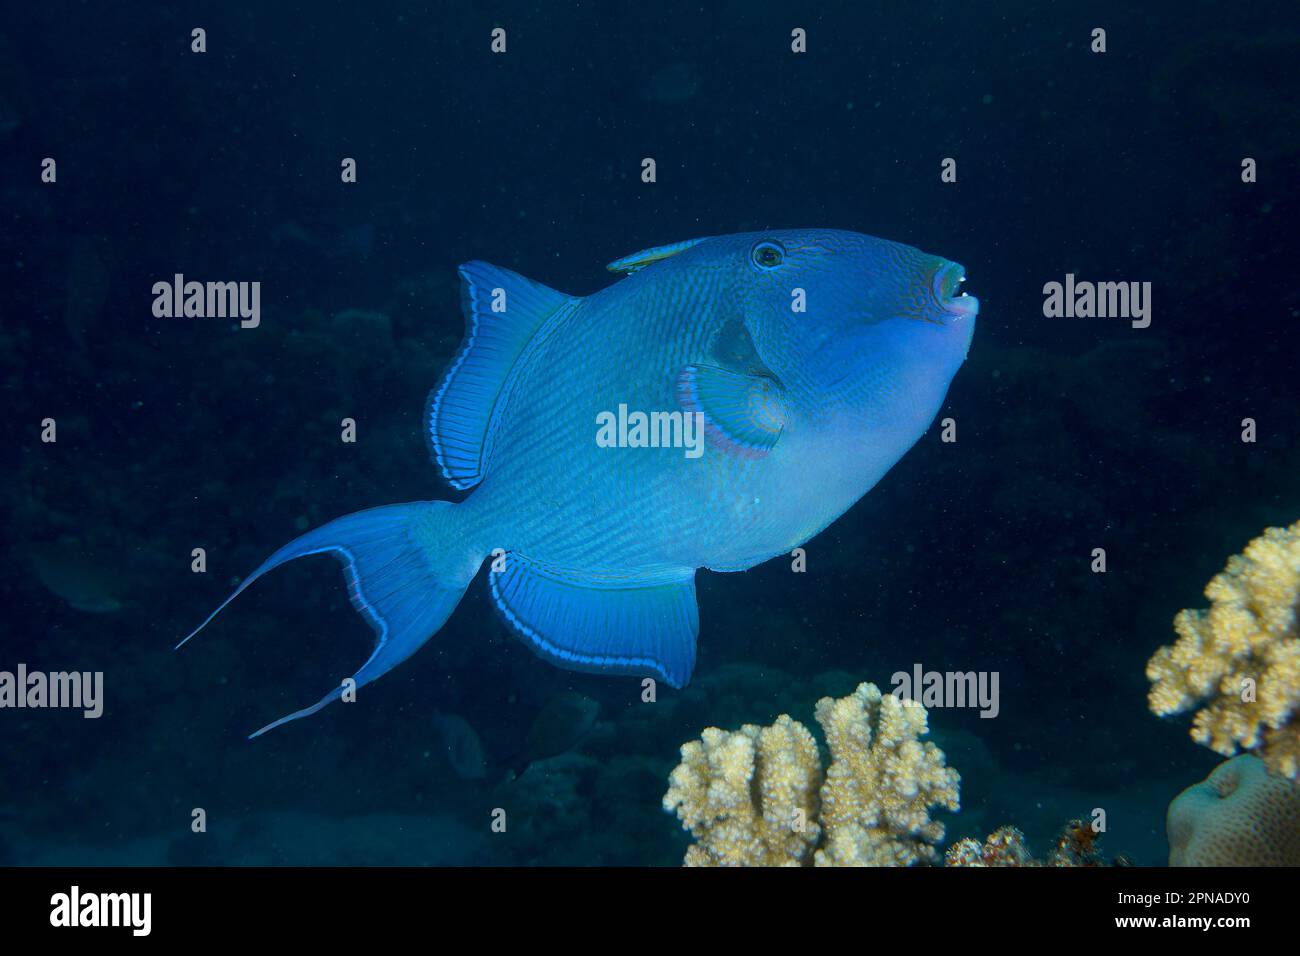 Blue triggerfish (Pseudobalistes fuscus) at night, releasable, dive site House Reef, Mangrove Bay, El Quesir, Red Sea, Egypt Stock Photo